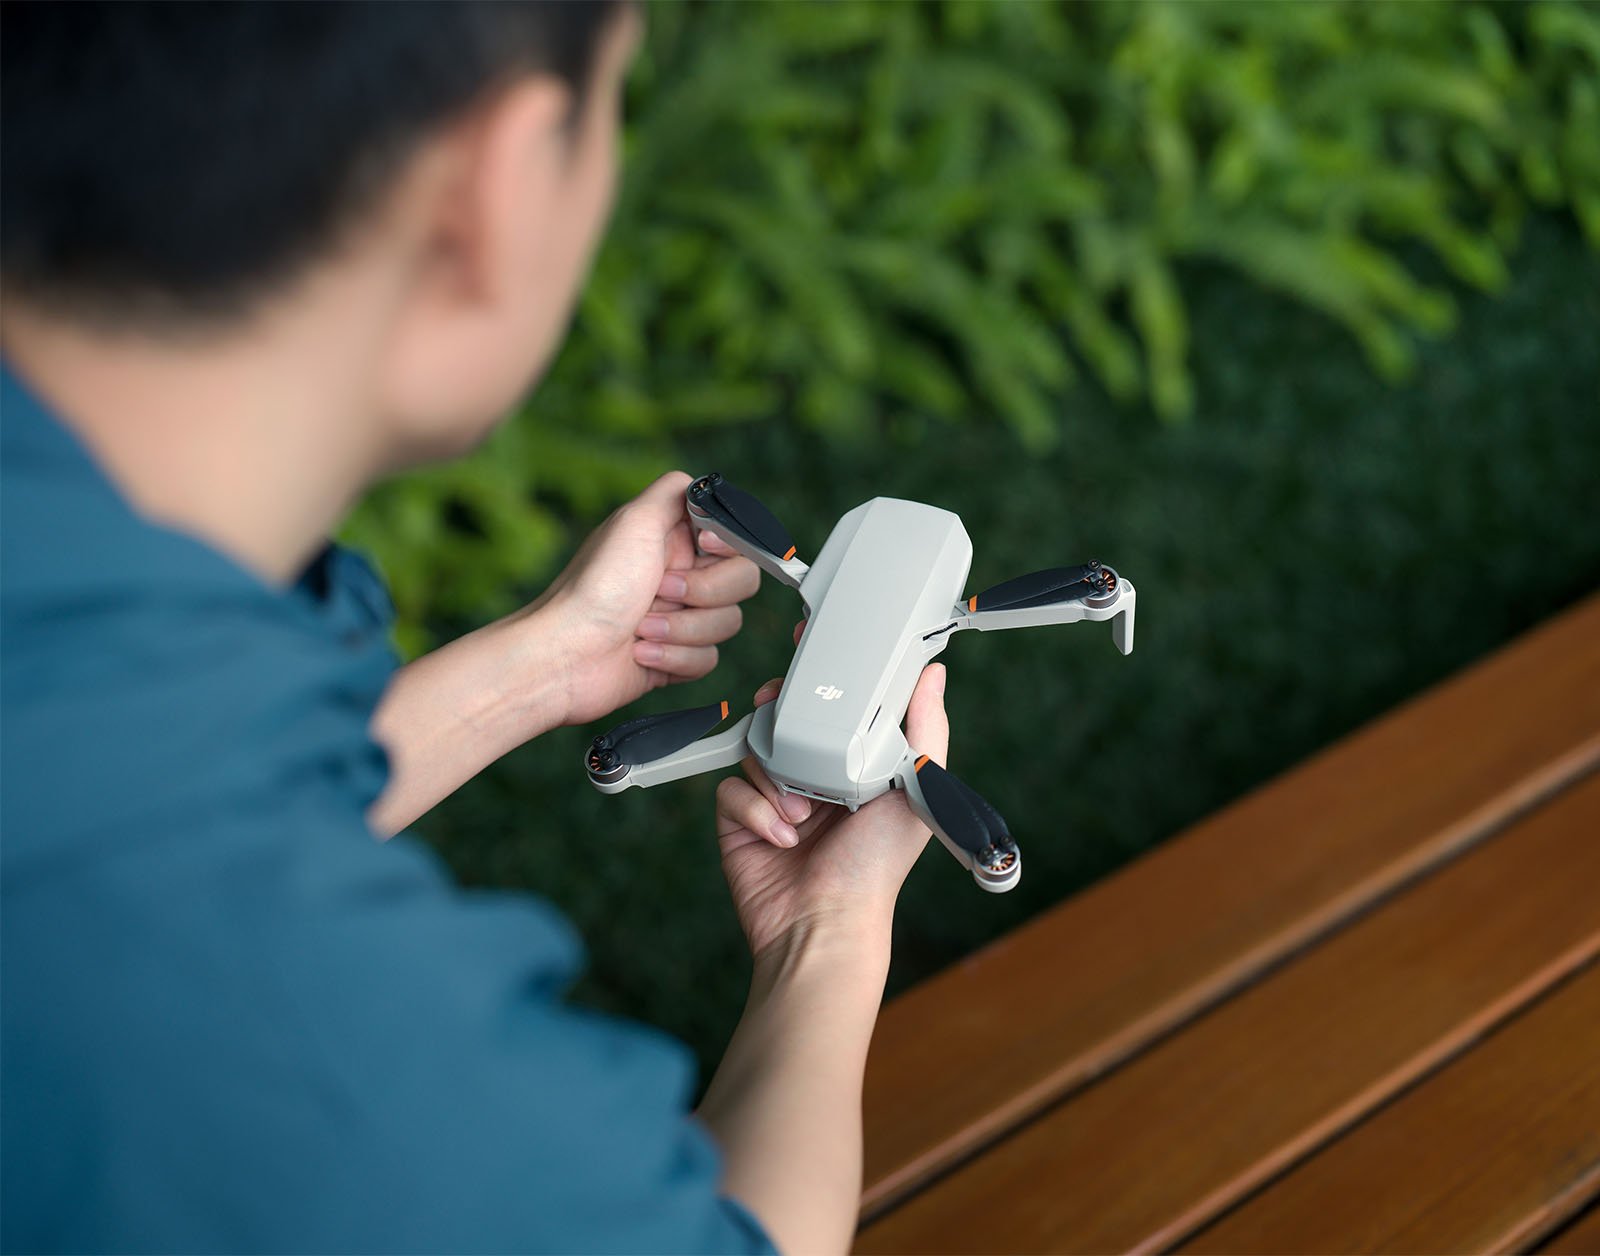 A man holding a small white drone with long propellers, preparing to launch, sitting on a bench with a green hedge in the background.